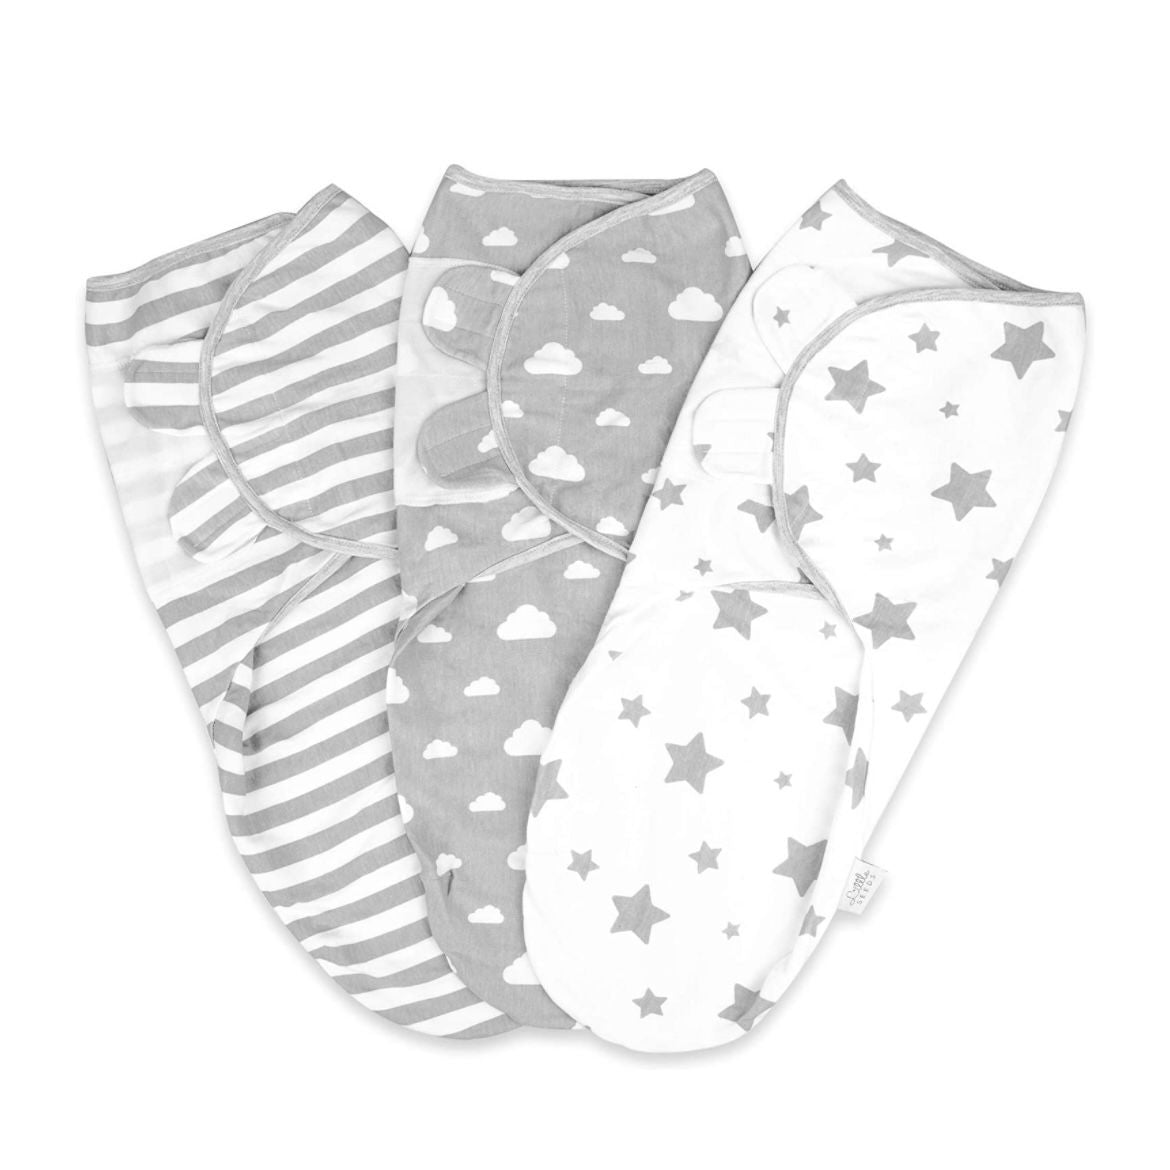 LITTLE SEEDS - BABY SWADDLE BLANKETS 0-3 MONTHS